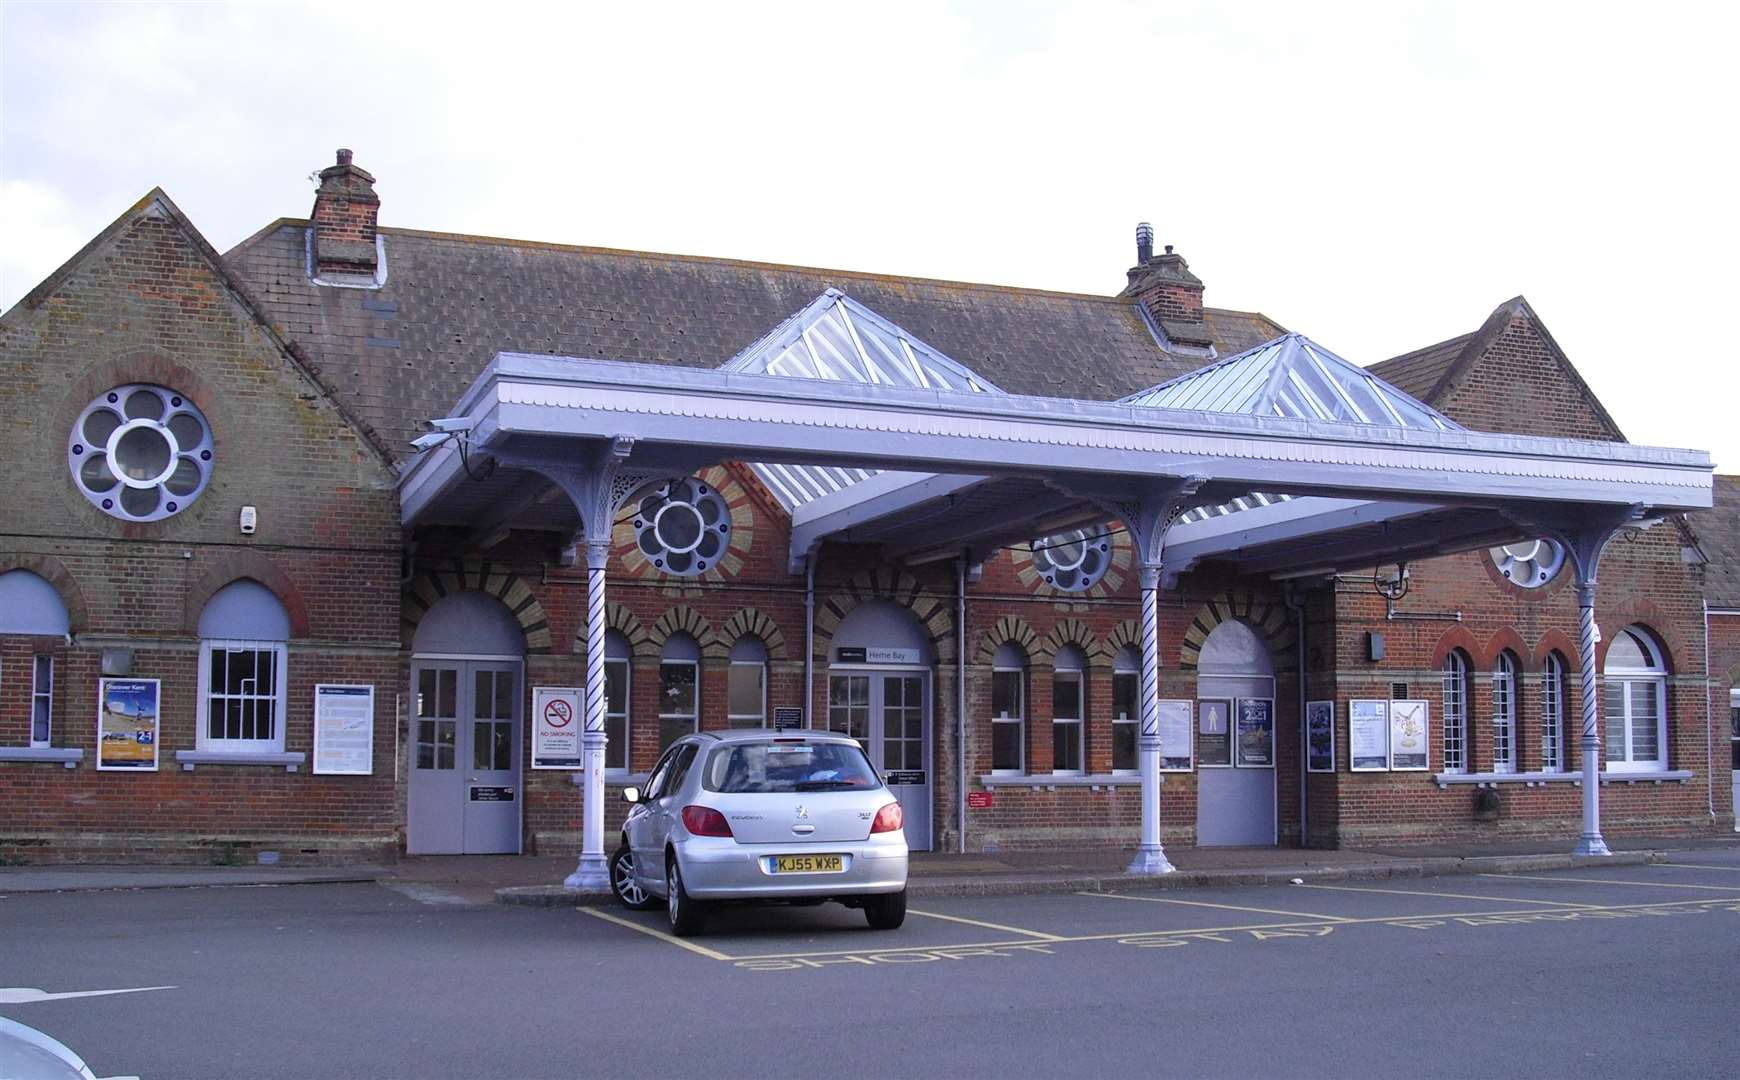 Emergency services were called to Herne Bay railway station